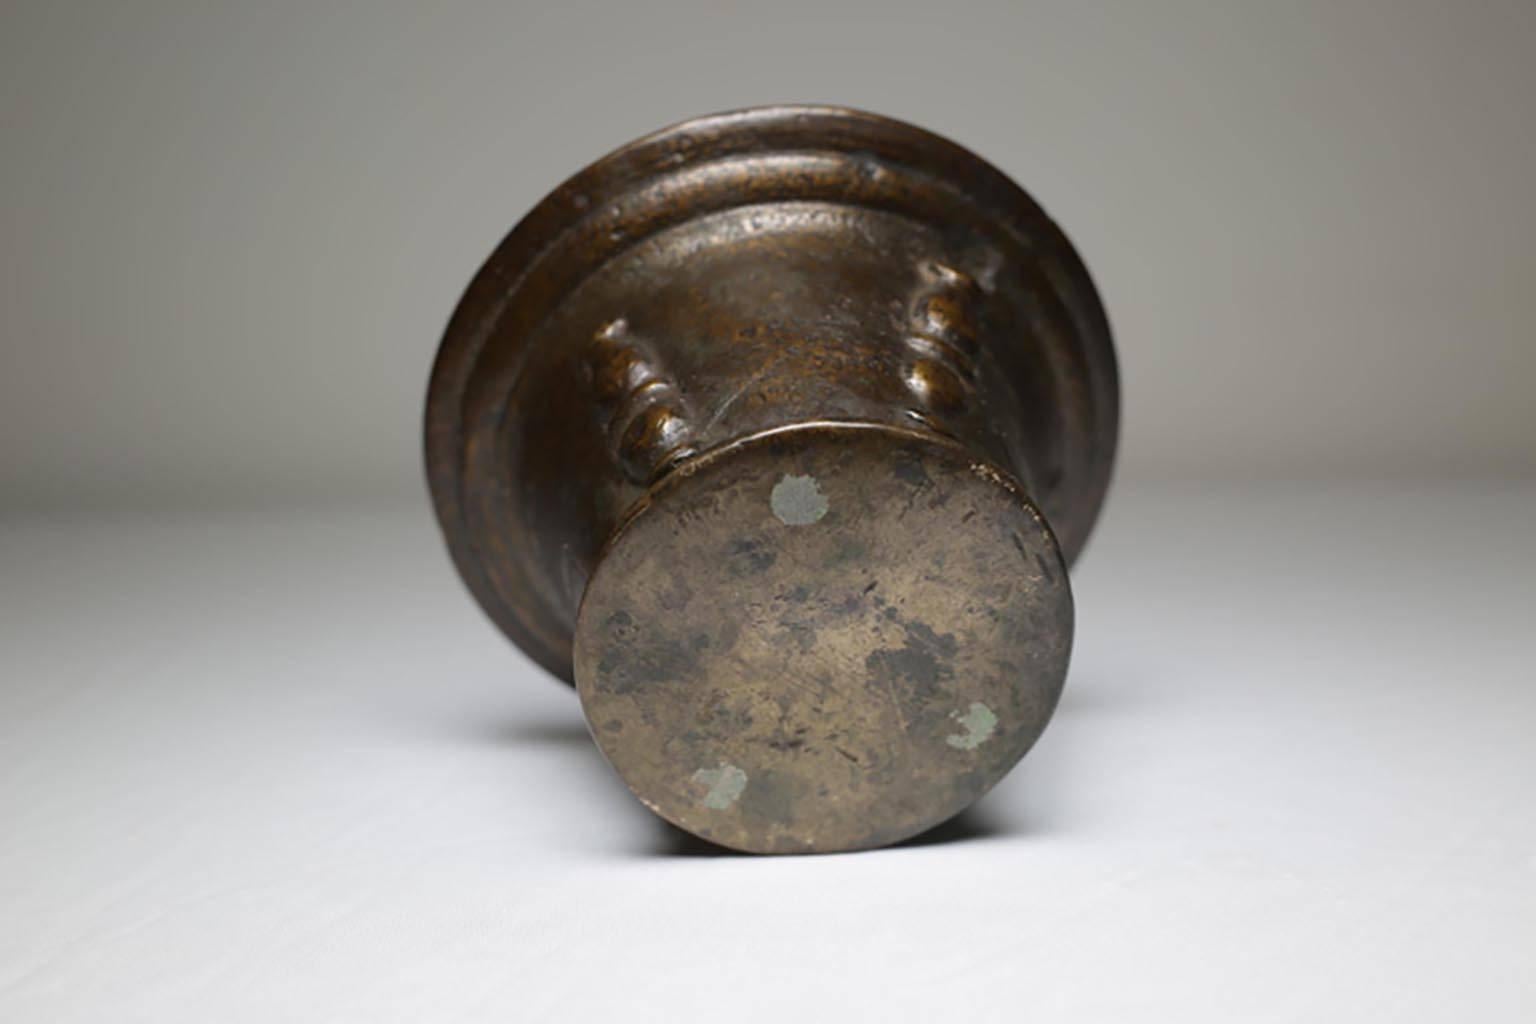 Bronze mortar that reflects a form common to the 16th century. The mortar was formed with a flared rim and slightly extended base. The body displays raised vertical, ridged bars, resembling half pilasters, surrounding the piece. It makes a great